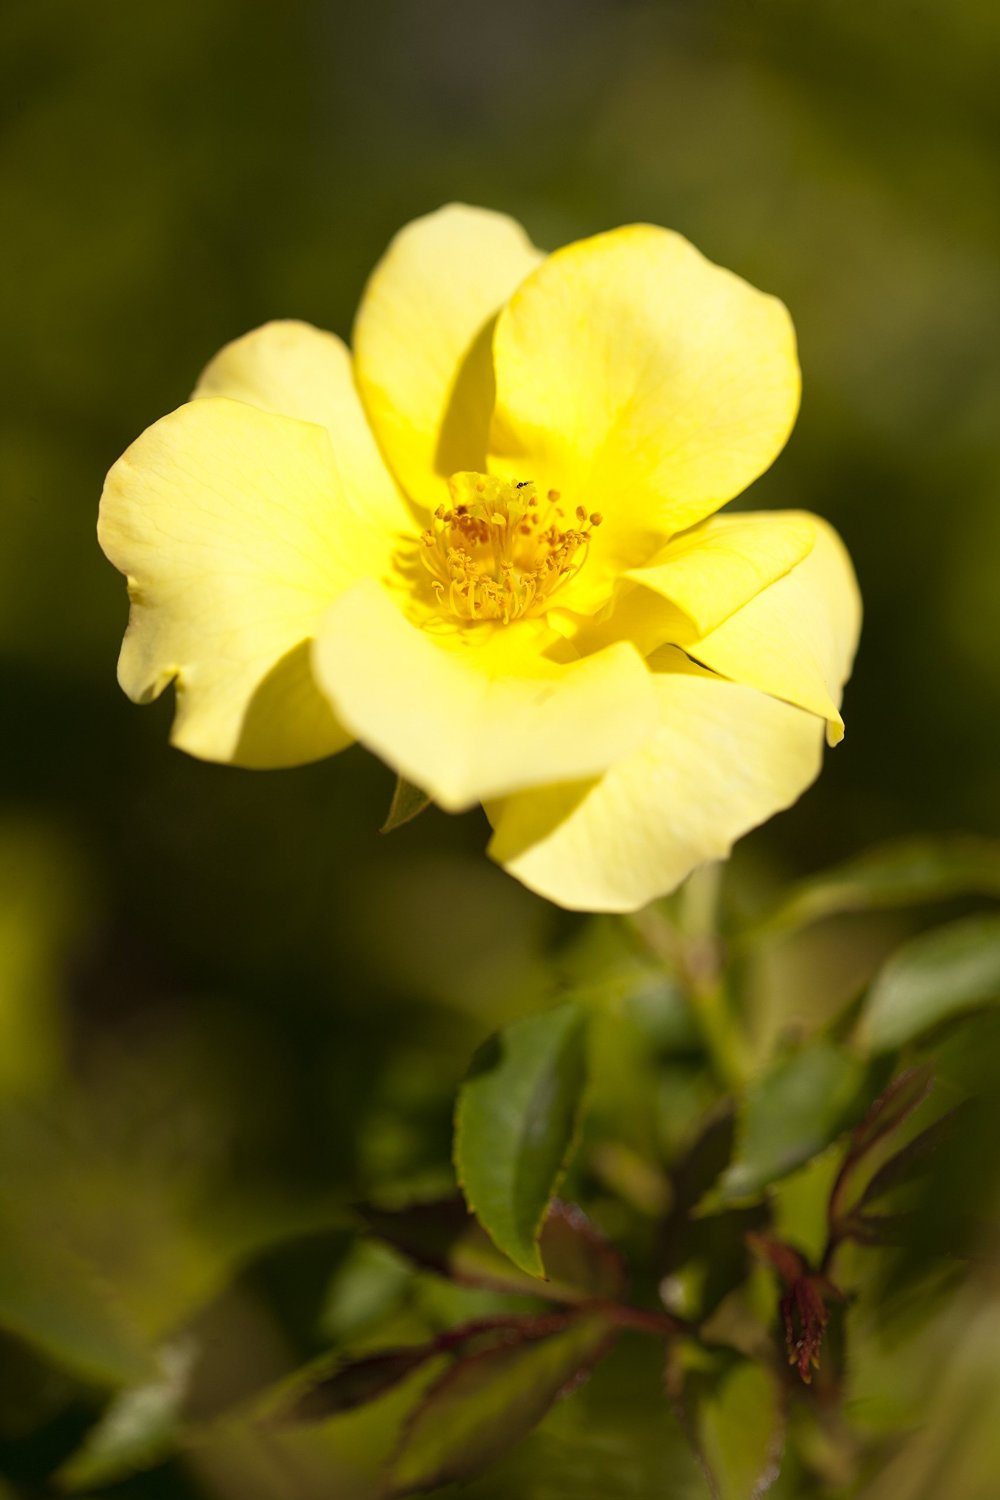 (1 Gallon) Thrive Lemon Rose, Fragrant, Beautiful Yellow Flowers, . The Buds and Flowers Are Yellow When They Open and Then Gradually Fade To White